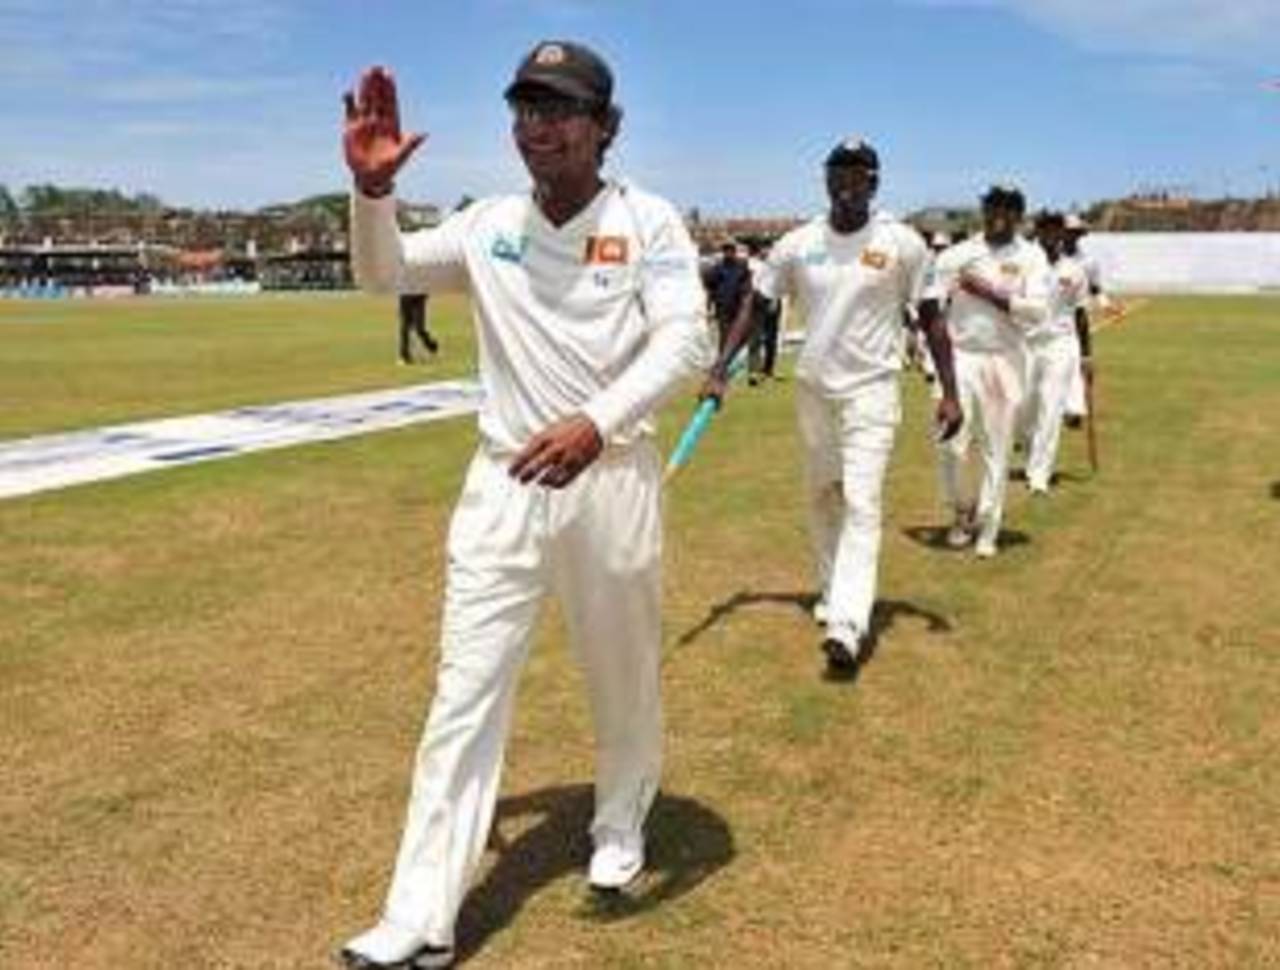 Kumar Sangakkara is all smiles after winning his first Test as captain, Sri Lanka v Pakistan, 1st Test, Galle, 4th day, July 7, 2009